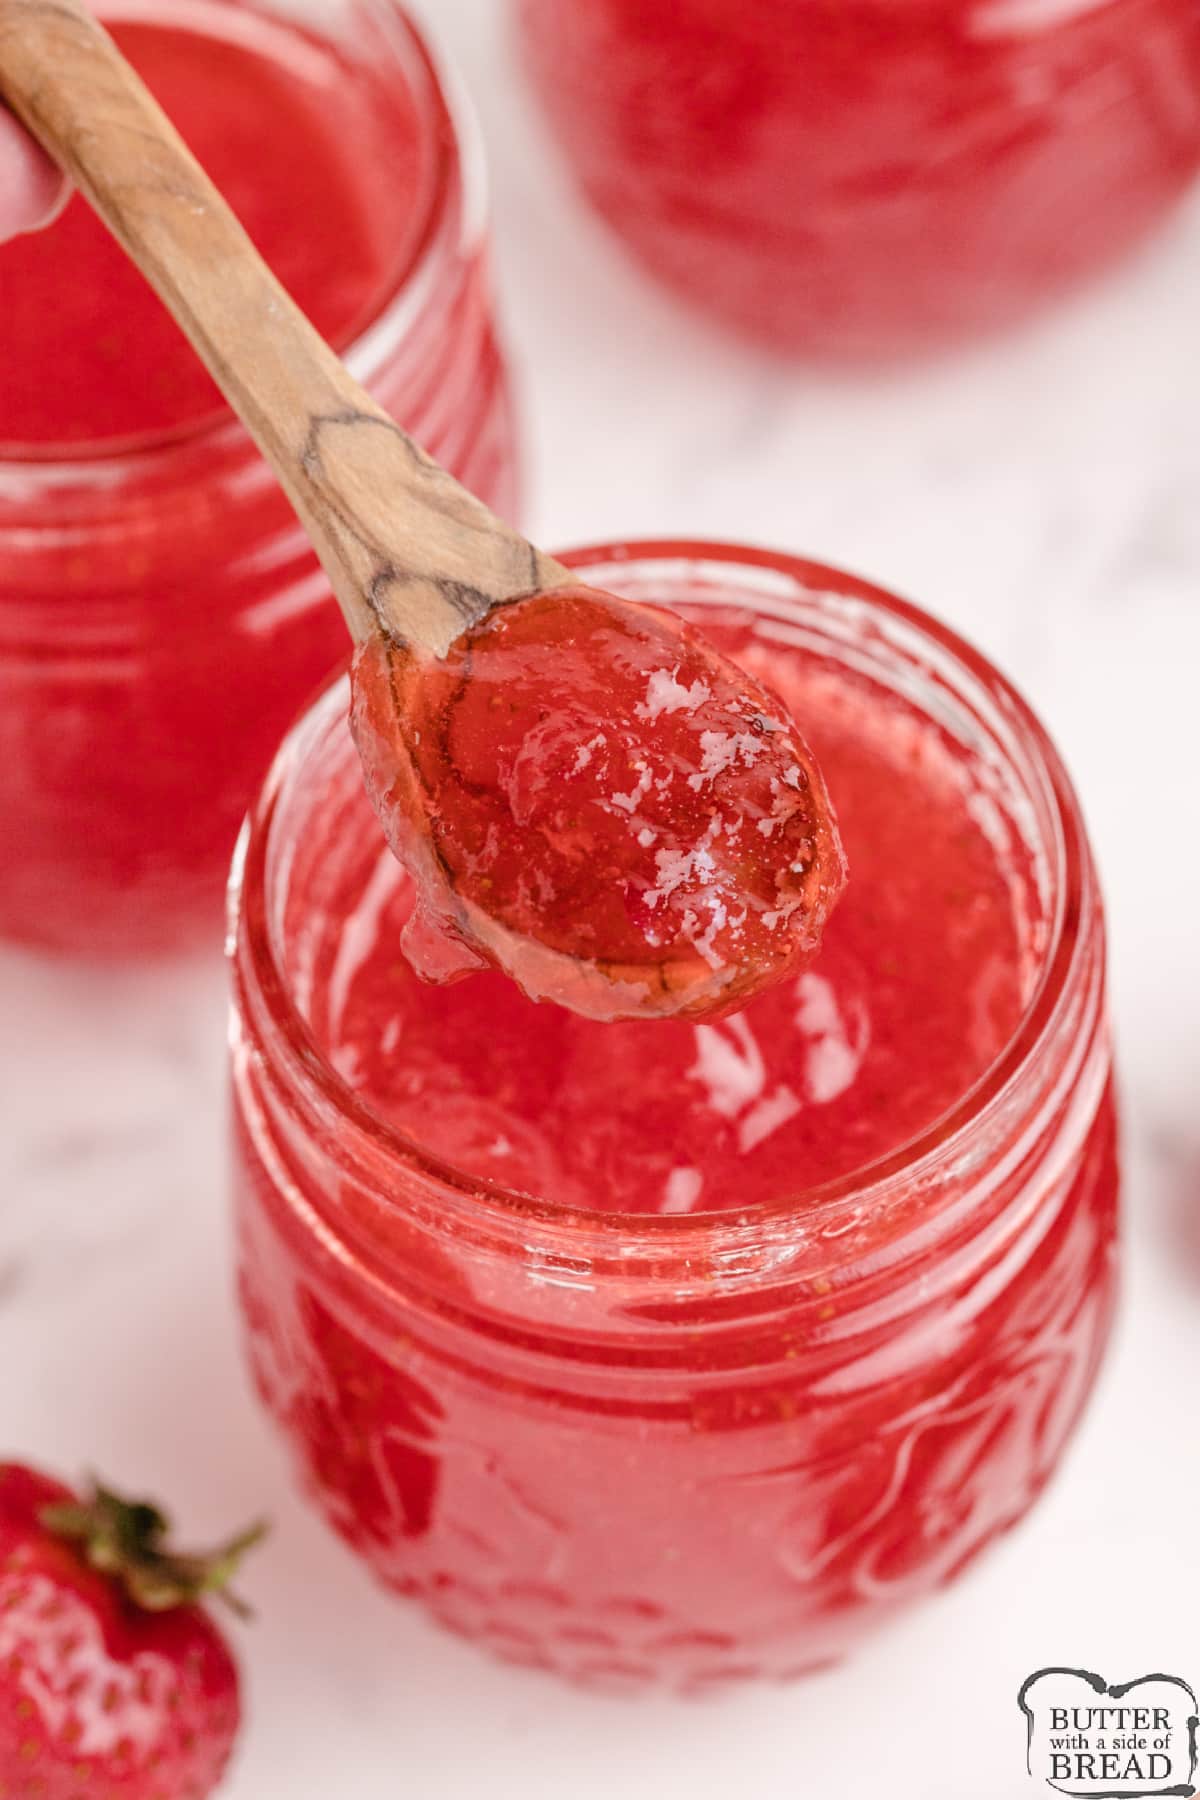 Kool-Aid Strawberry Jam made with strawberries, pectin, water, sugar and strawberry Kool-Aid. Perfectly sweet homemade strawberry jam with the best strawberry flavor!